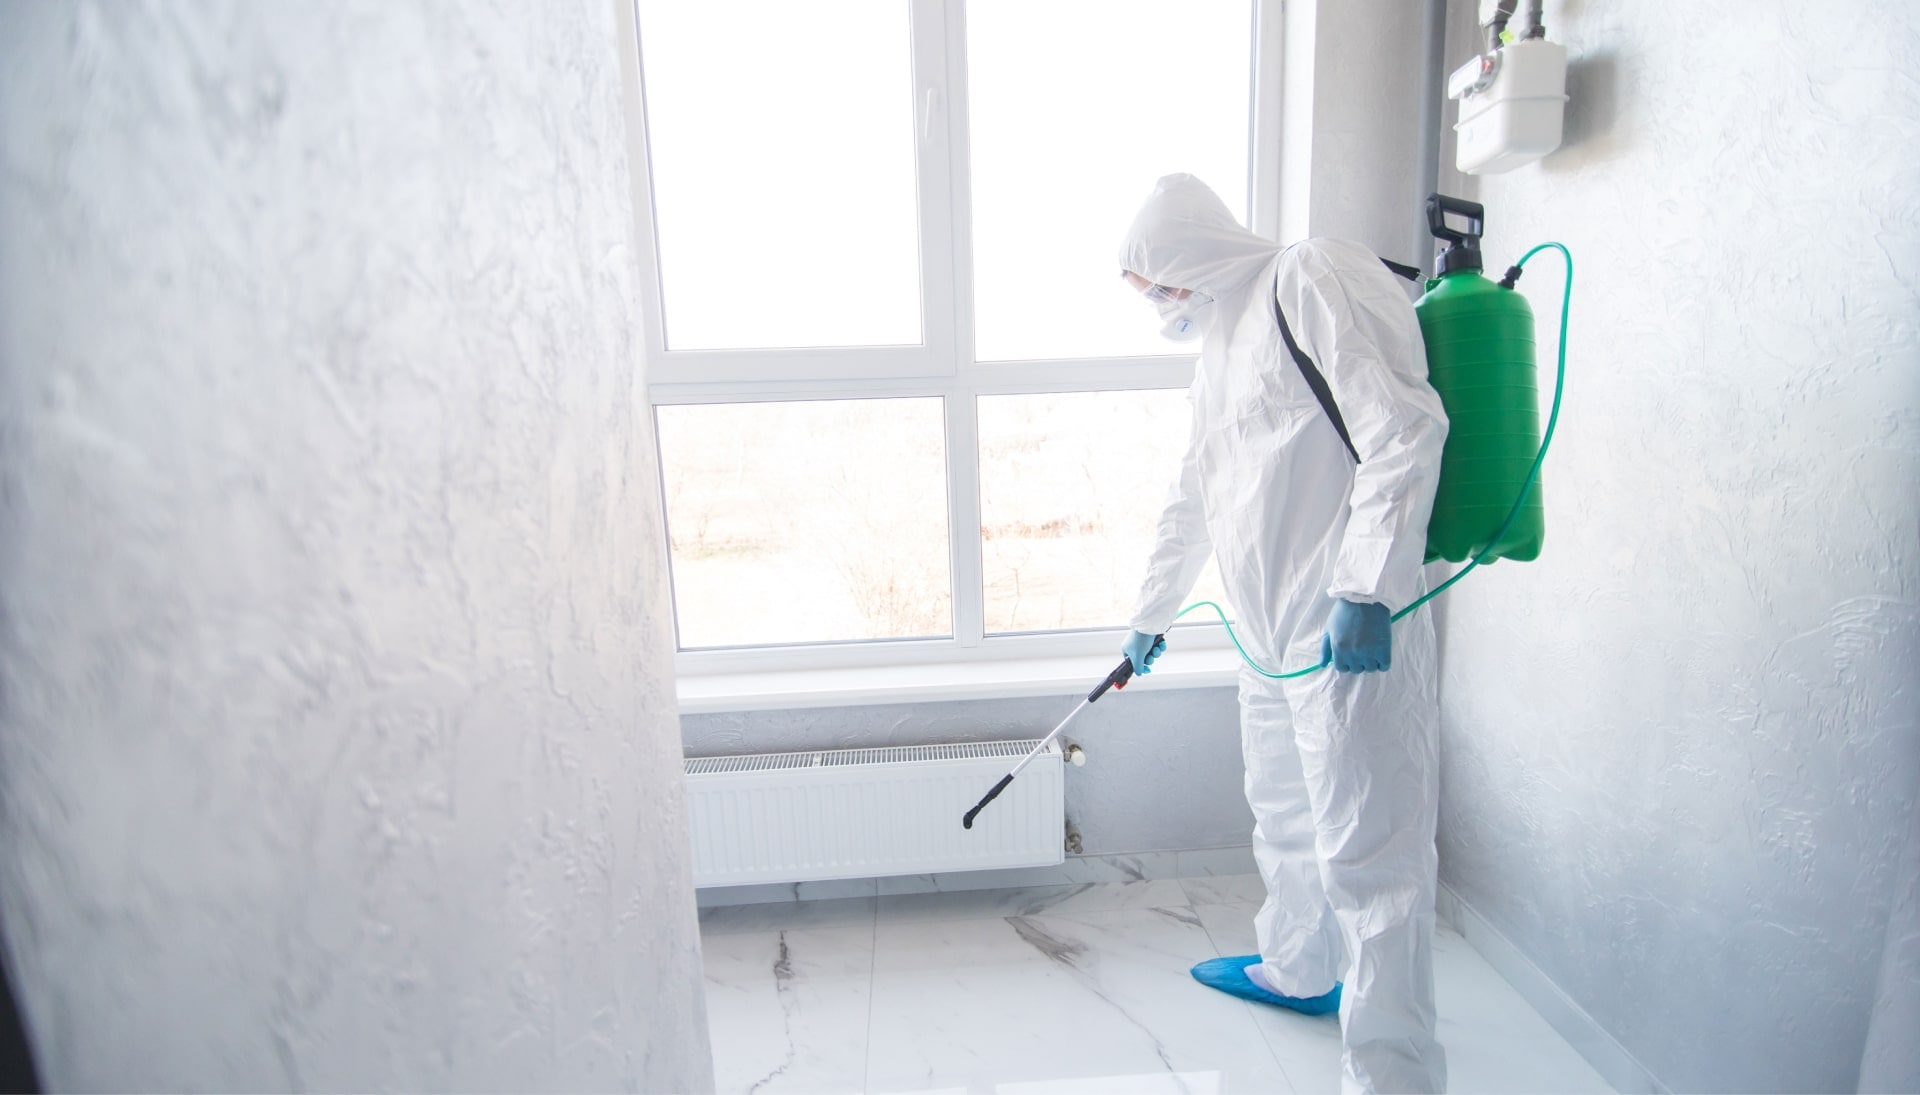 We provide the highest-quality mold inspection, testing, and removal services in the Phoenix, Arizona area.